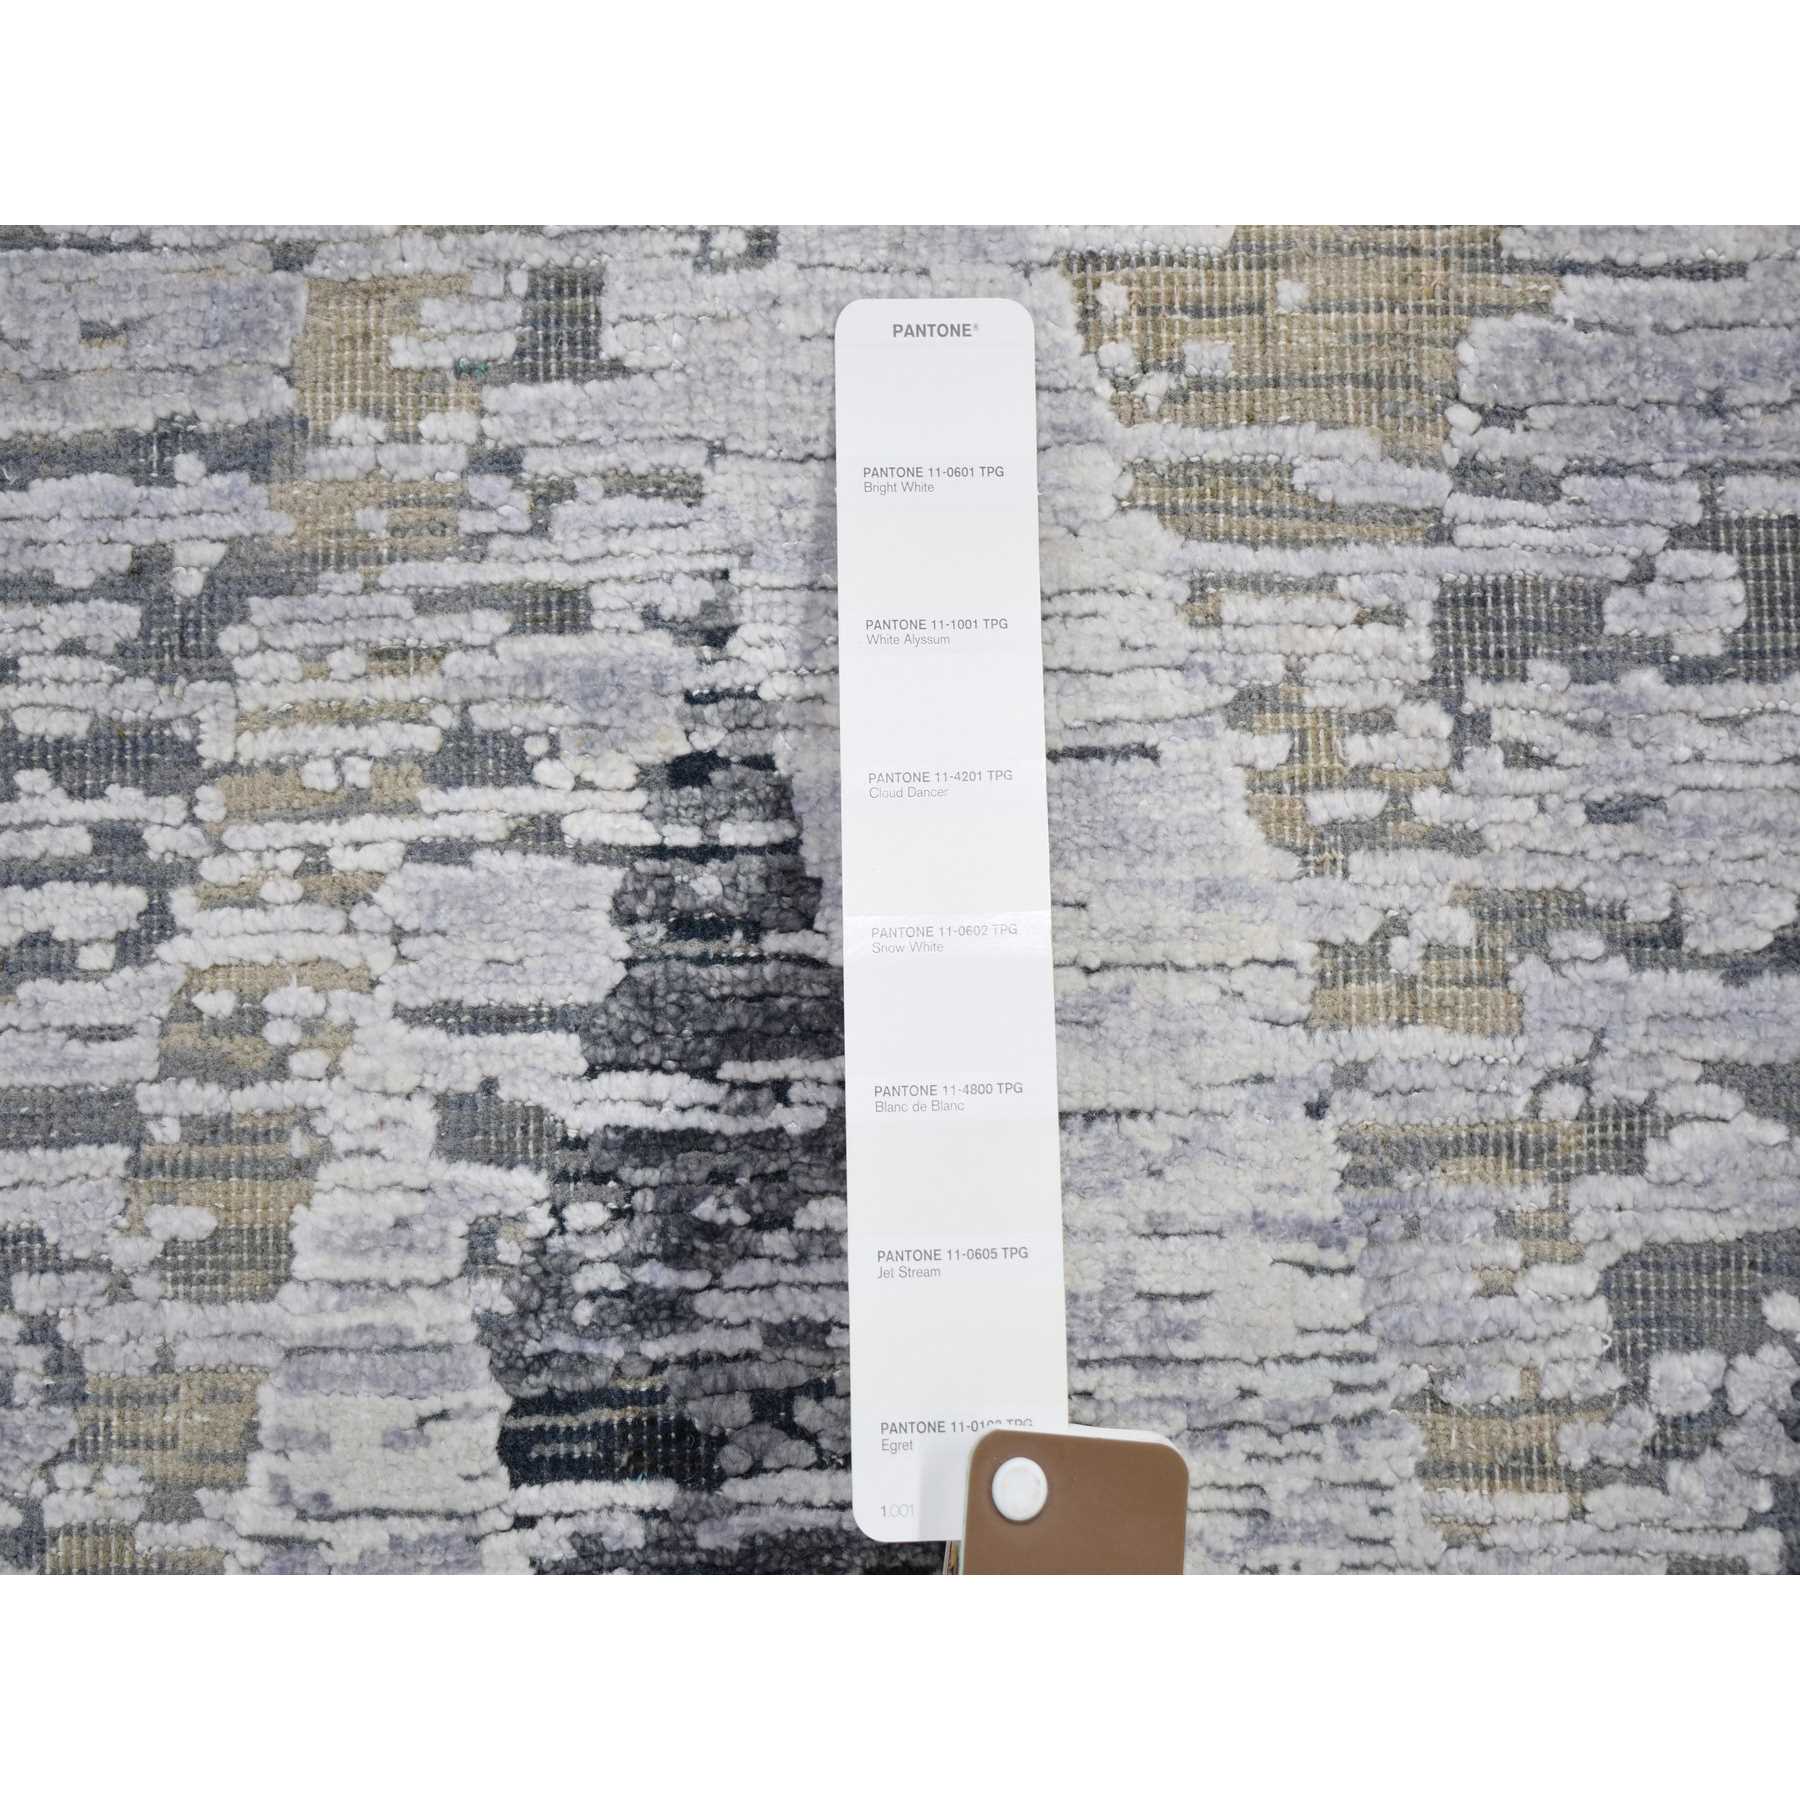 Modern-and-Contemporary-Hand-Knotted-Rug-296340